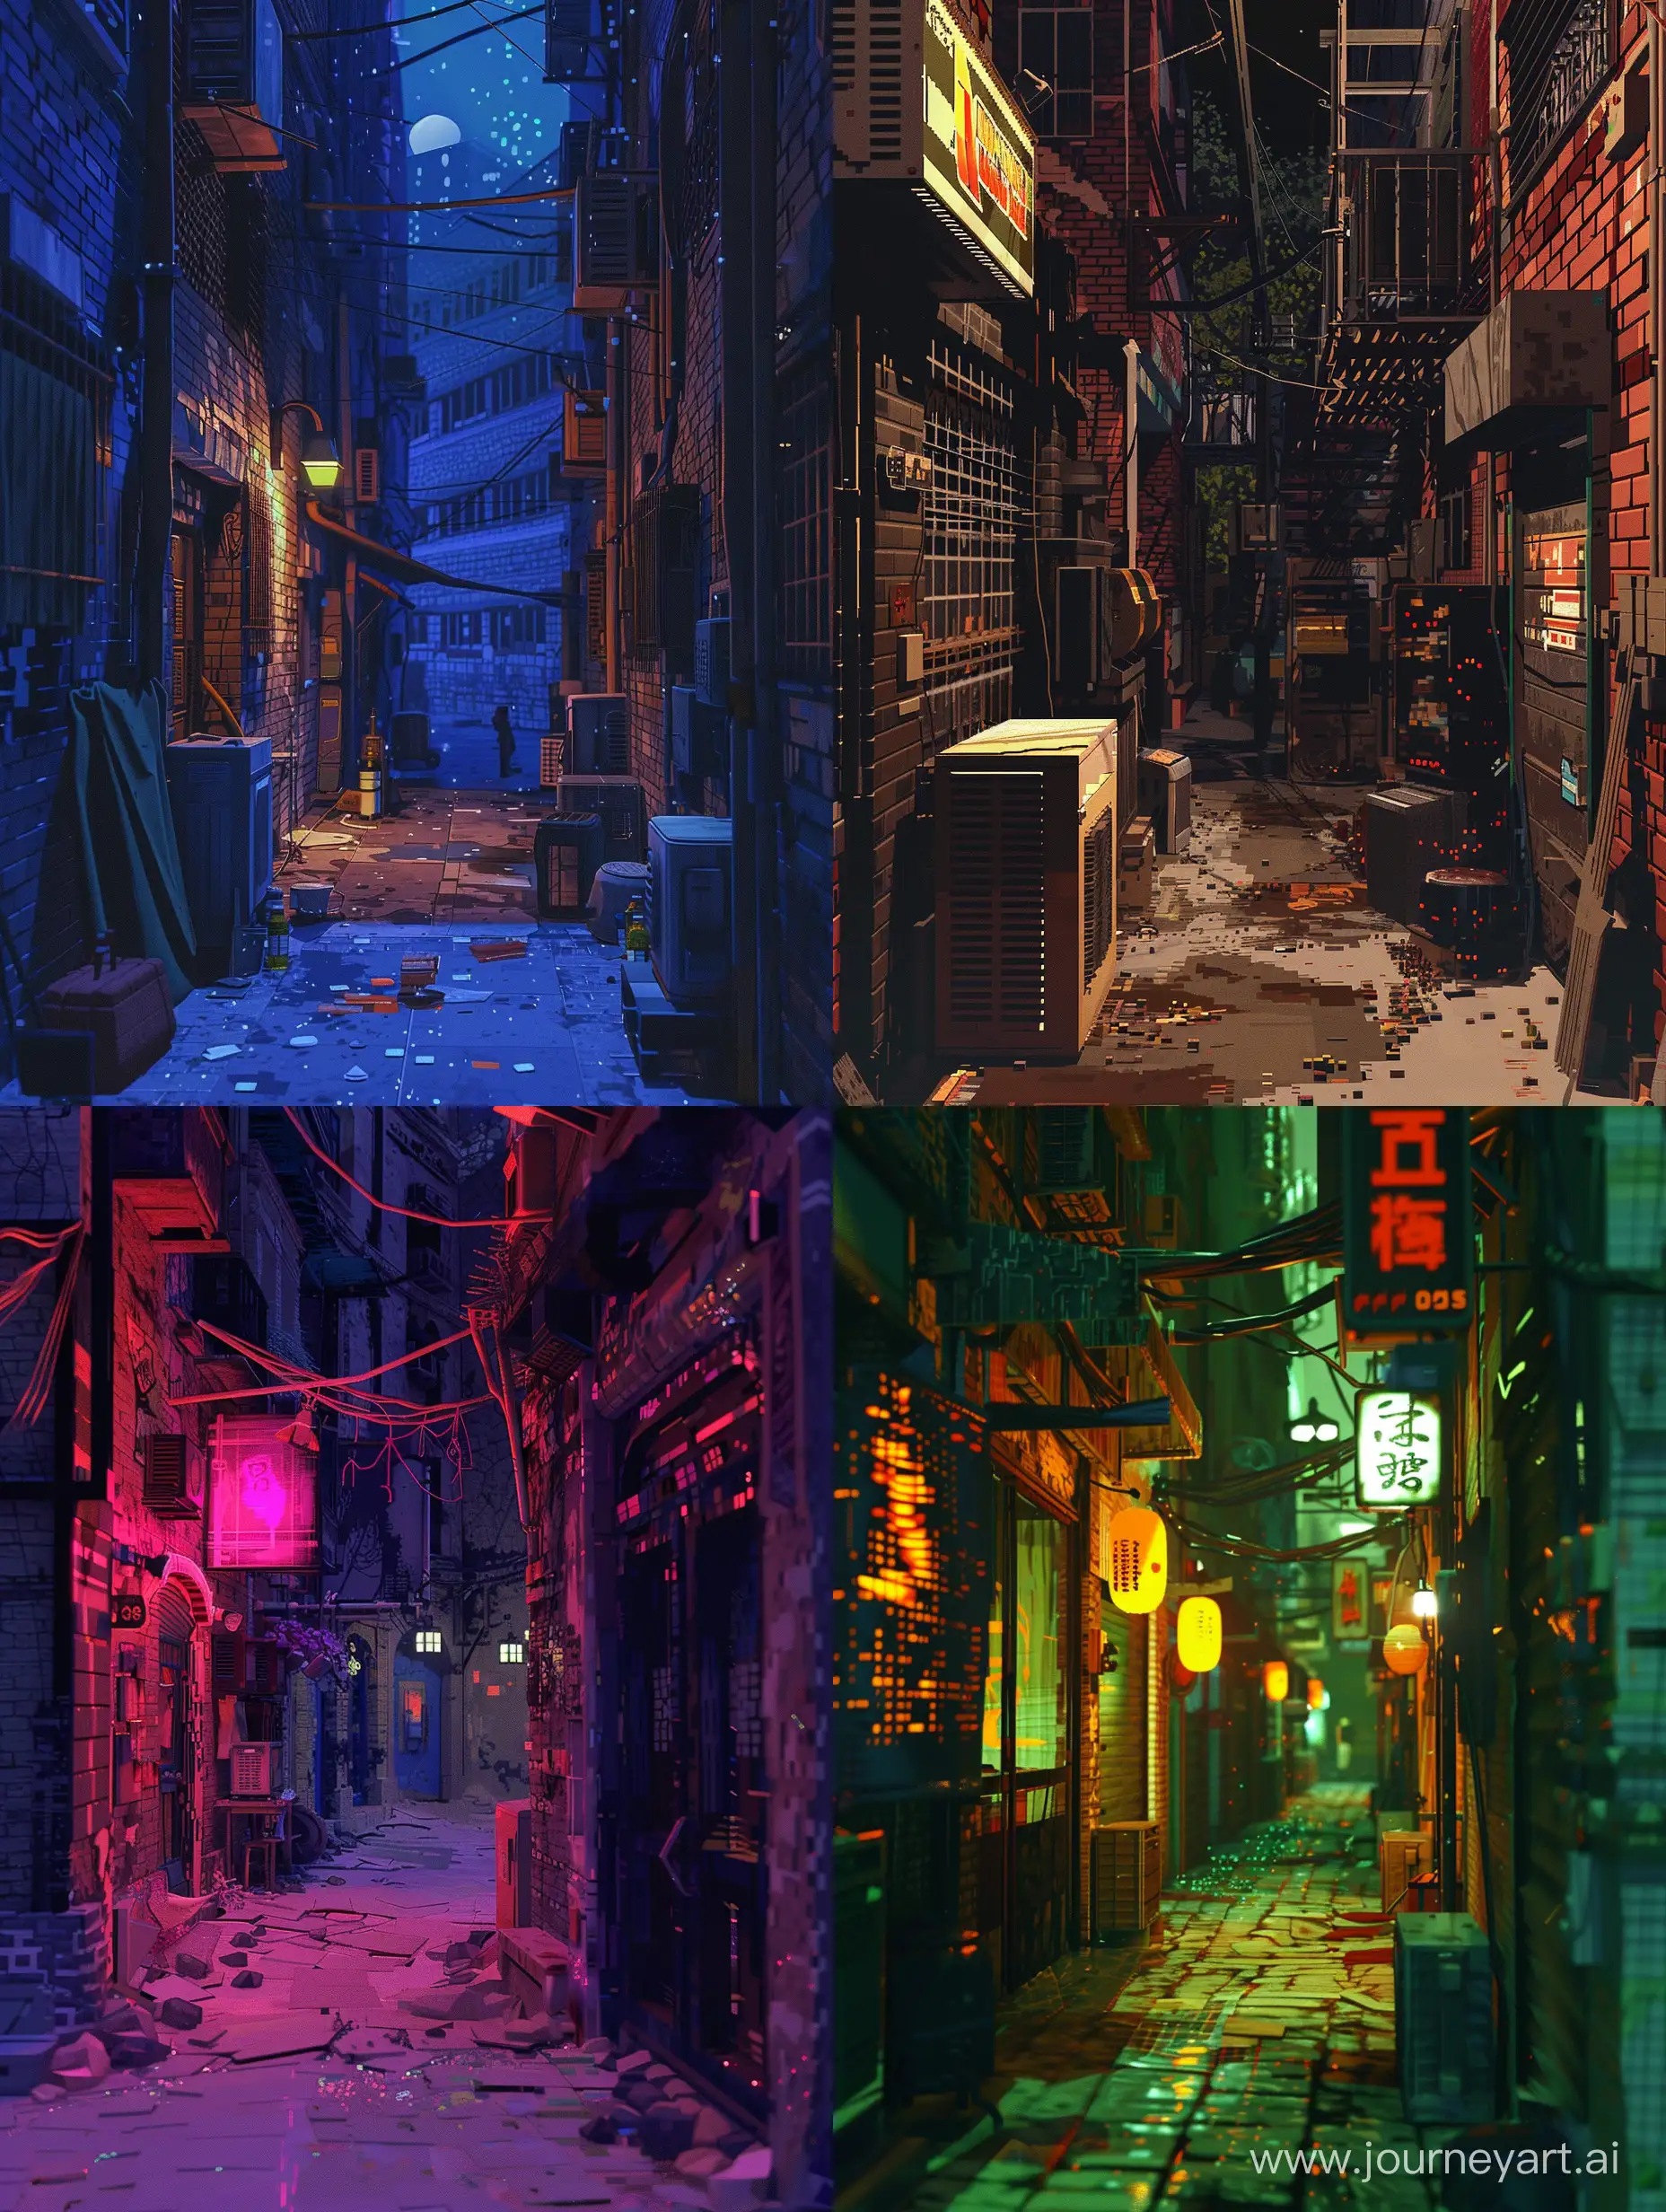 Nostalgic-Nighttime-Low-Poly-Video-Game-Alley-Scene